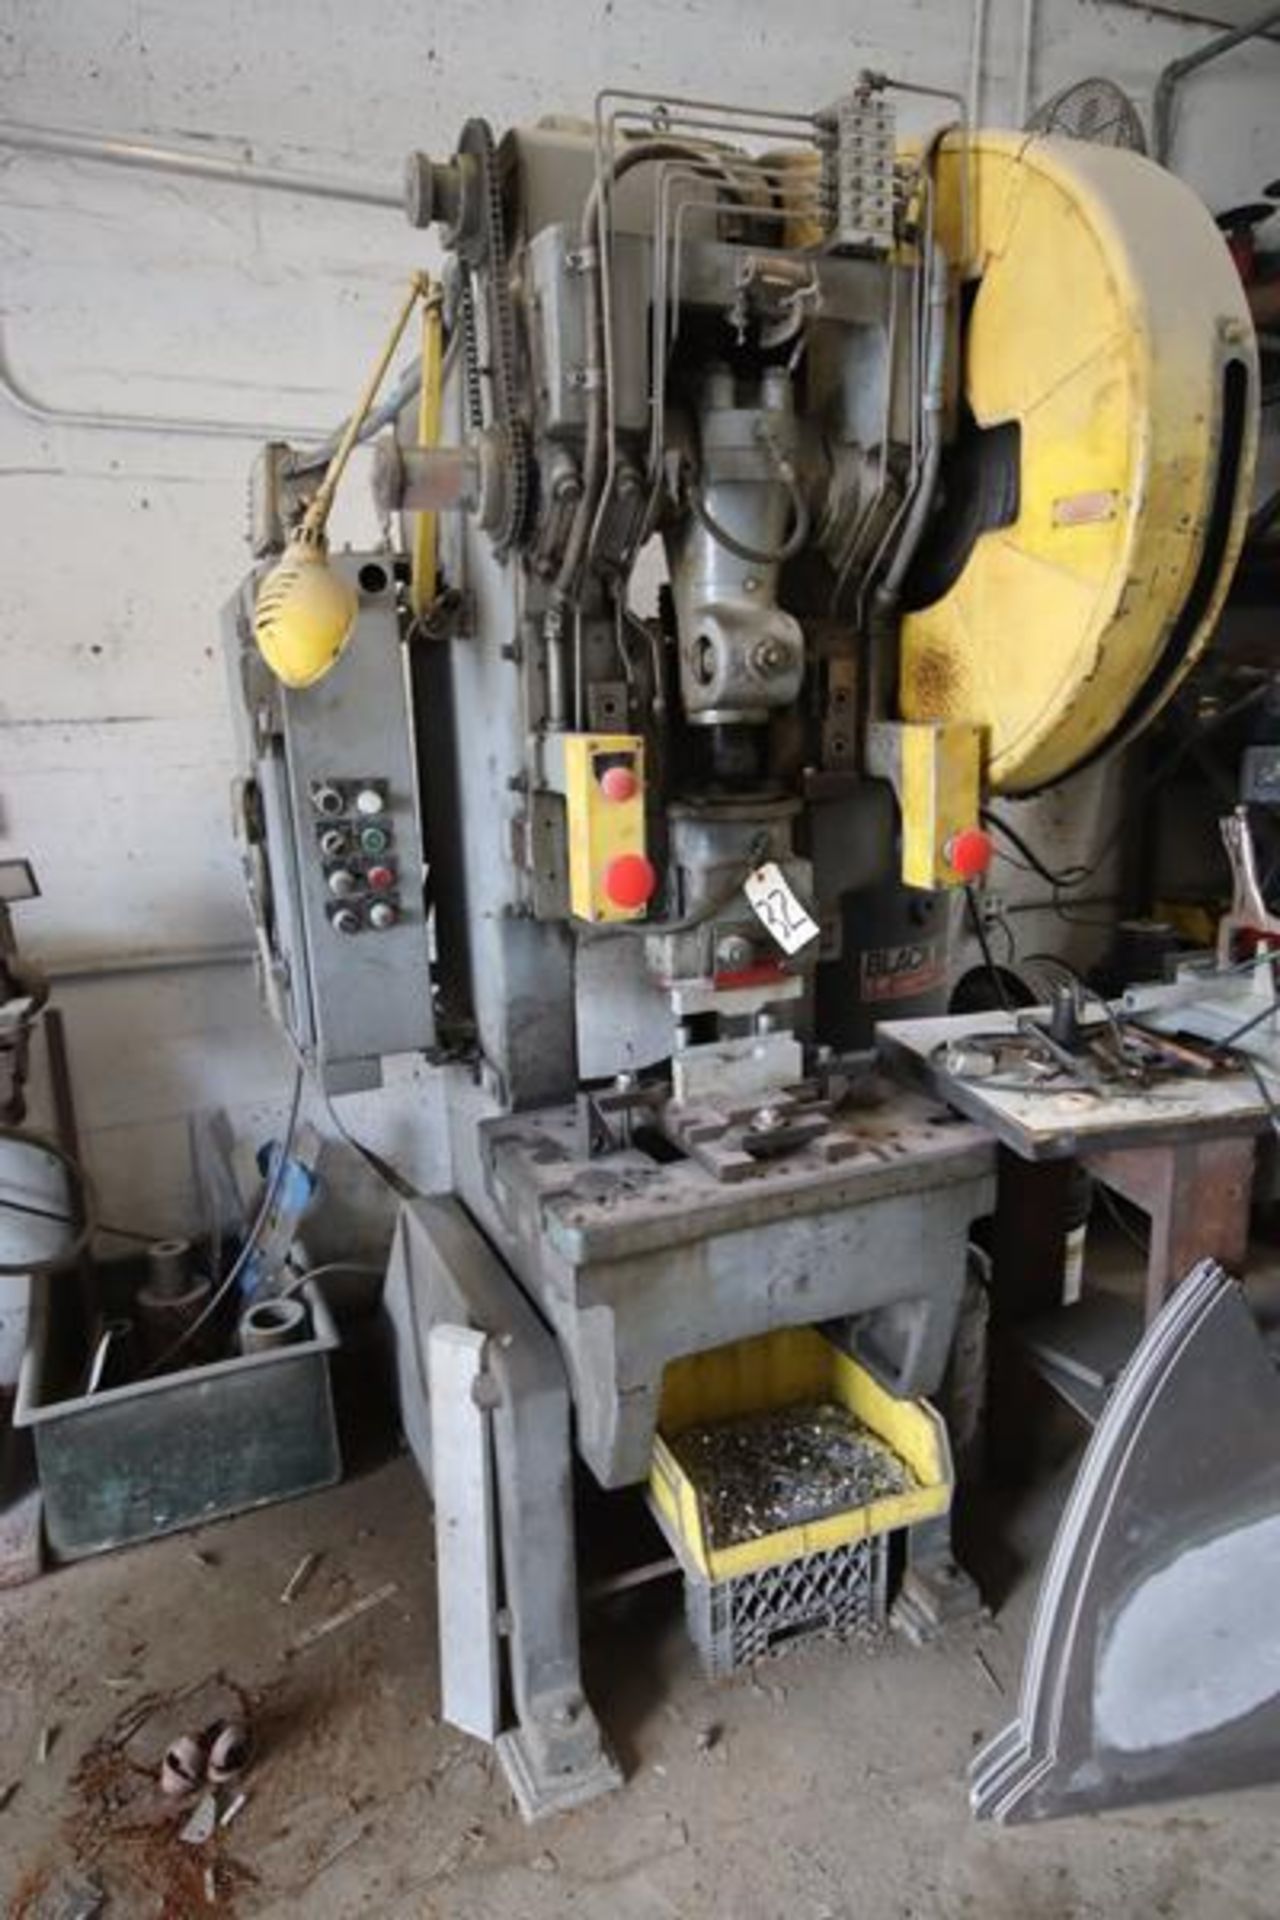 Bliss OBI Punch Press, 35 Ton, S/N#H57628, HP45006, Year 1967 (No Dies or Fixtures)